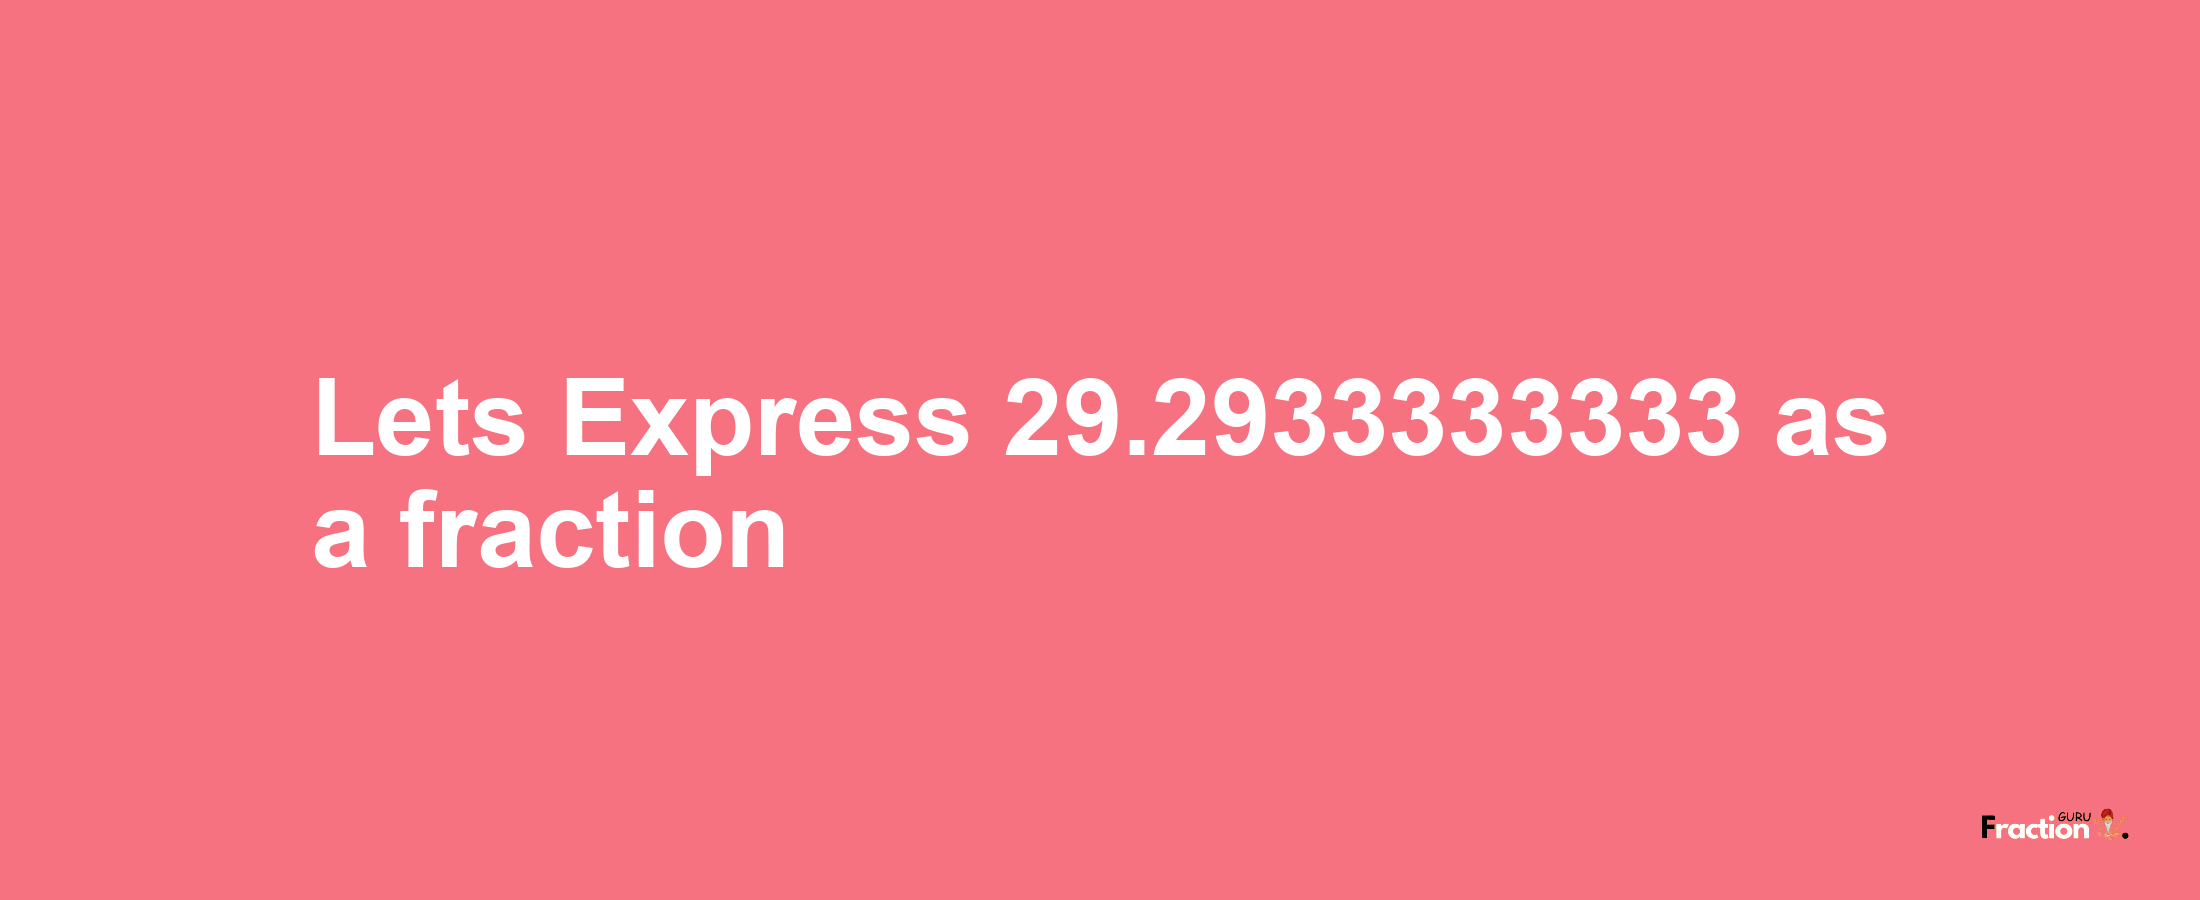 Lets Express 29.2933333333 as afraction